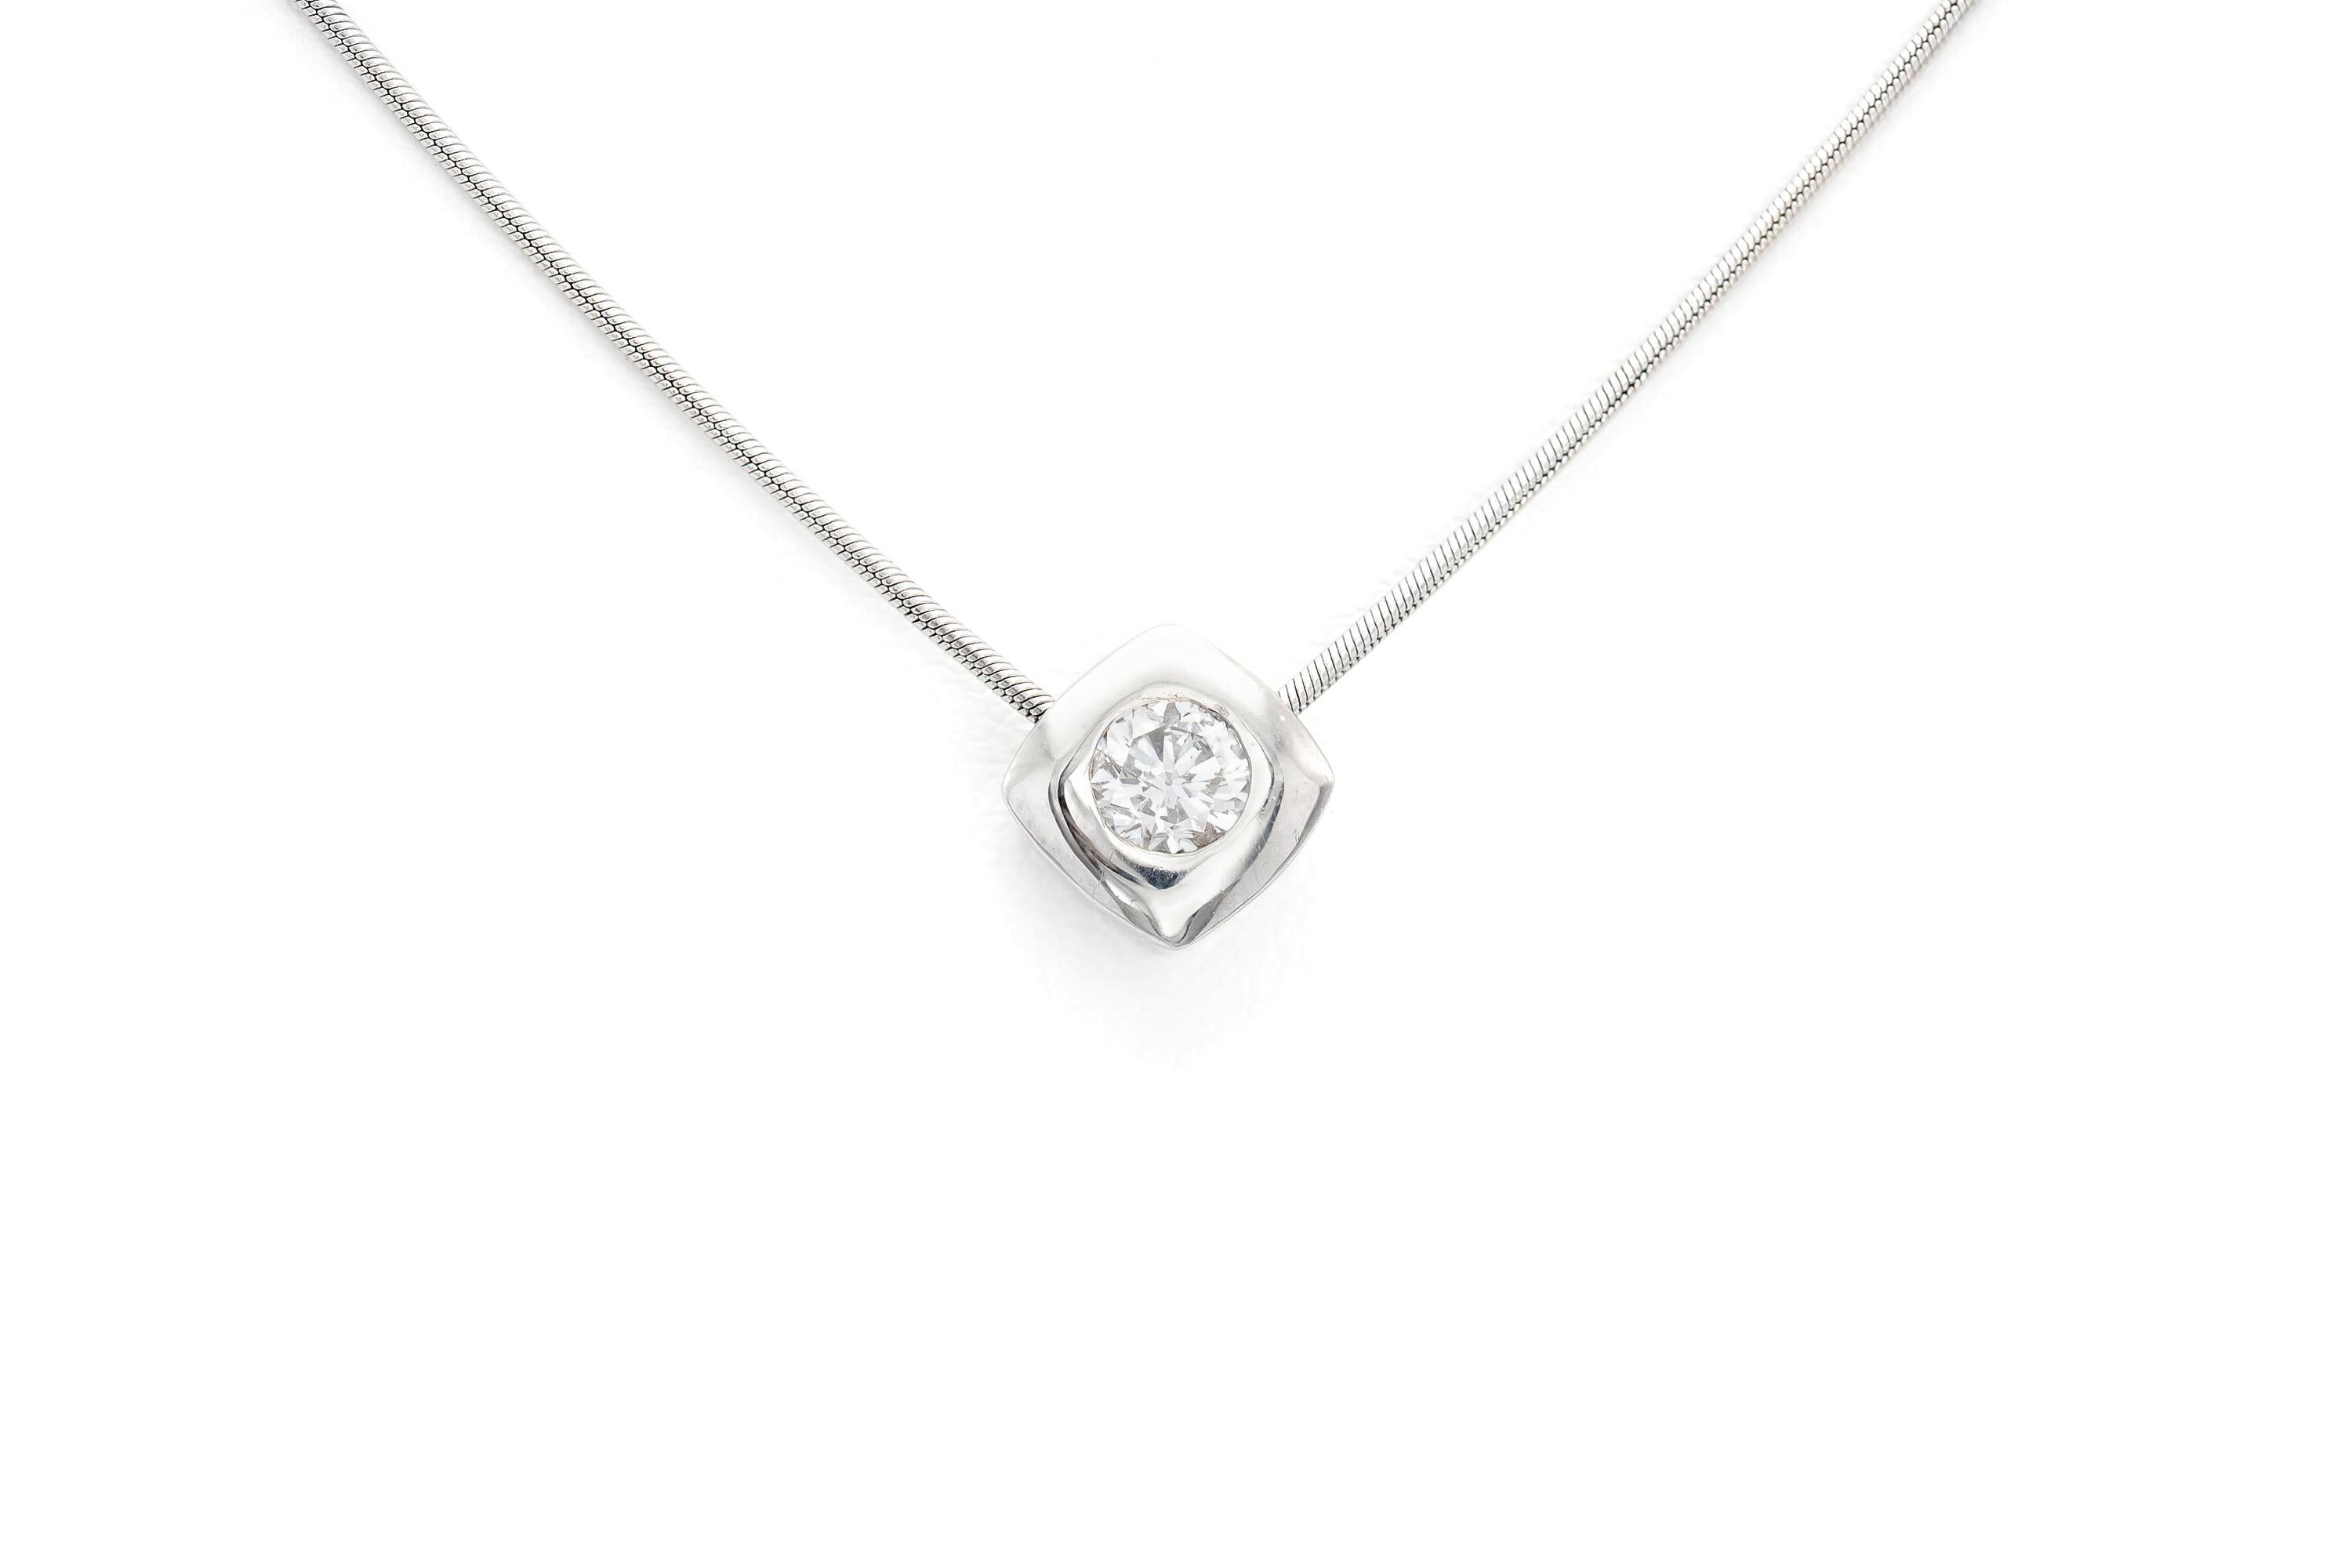 Finely crafted in 14k white gold with a Round Brilliant cut diamond weighing 0.50 carats.
Made in Italy